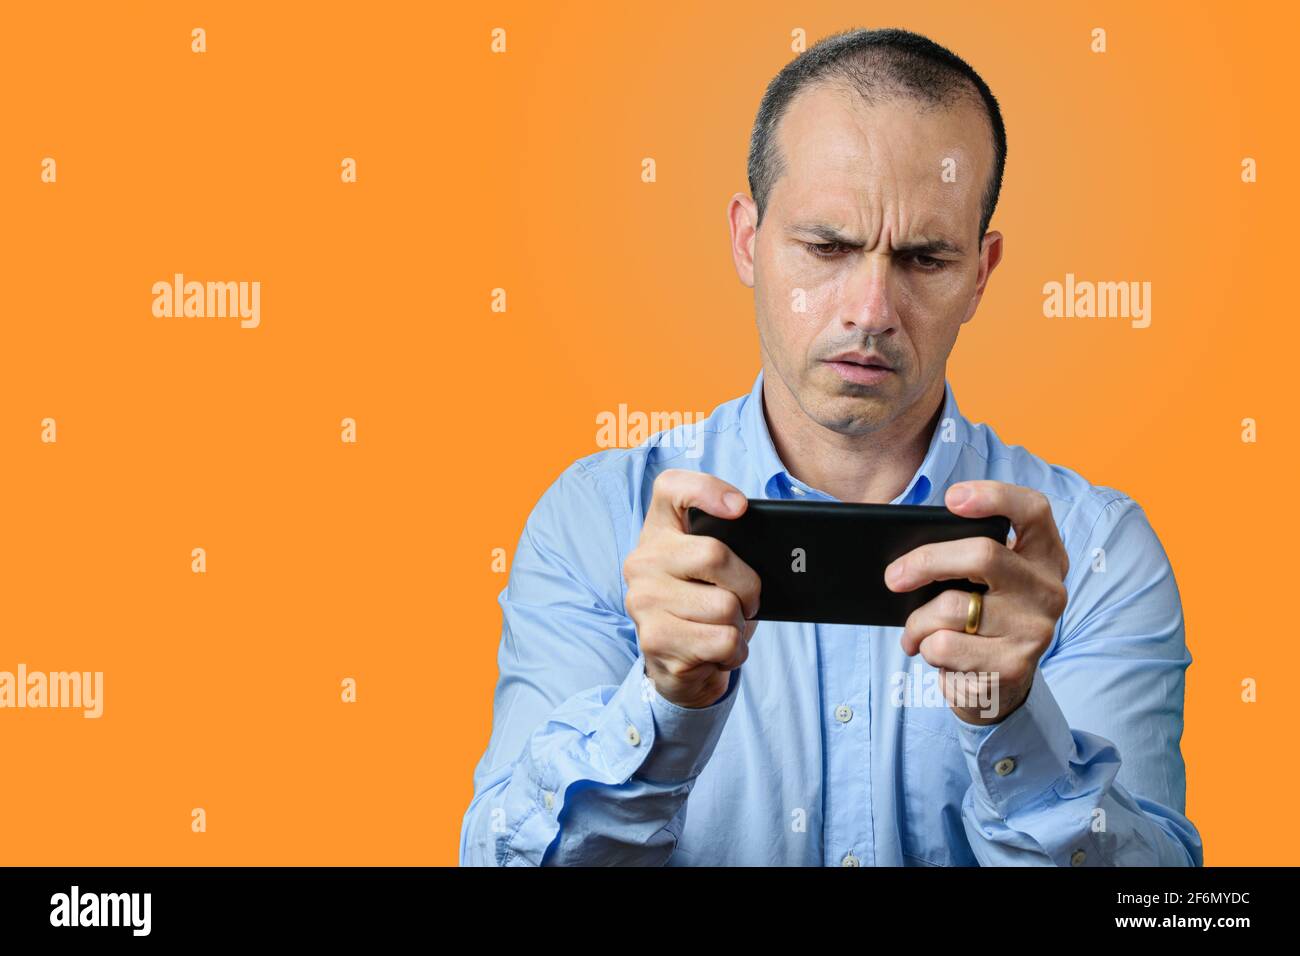 Mature man in formal wear looking at his smartphone and very sad. Orange background. Stock Photo